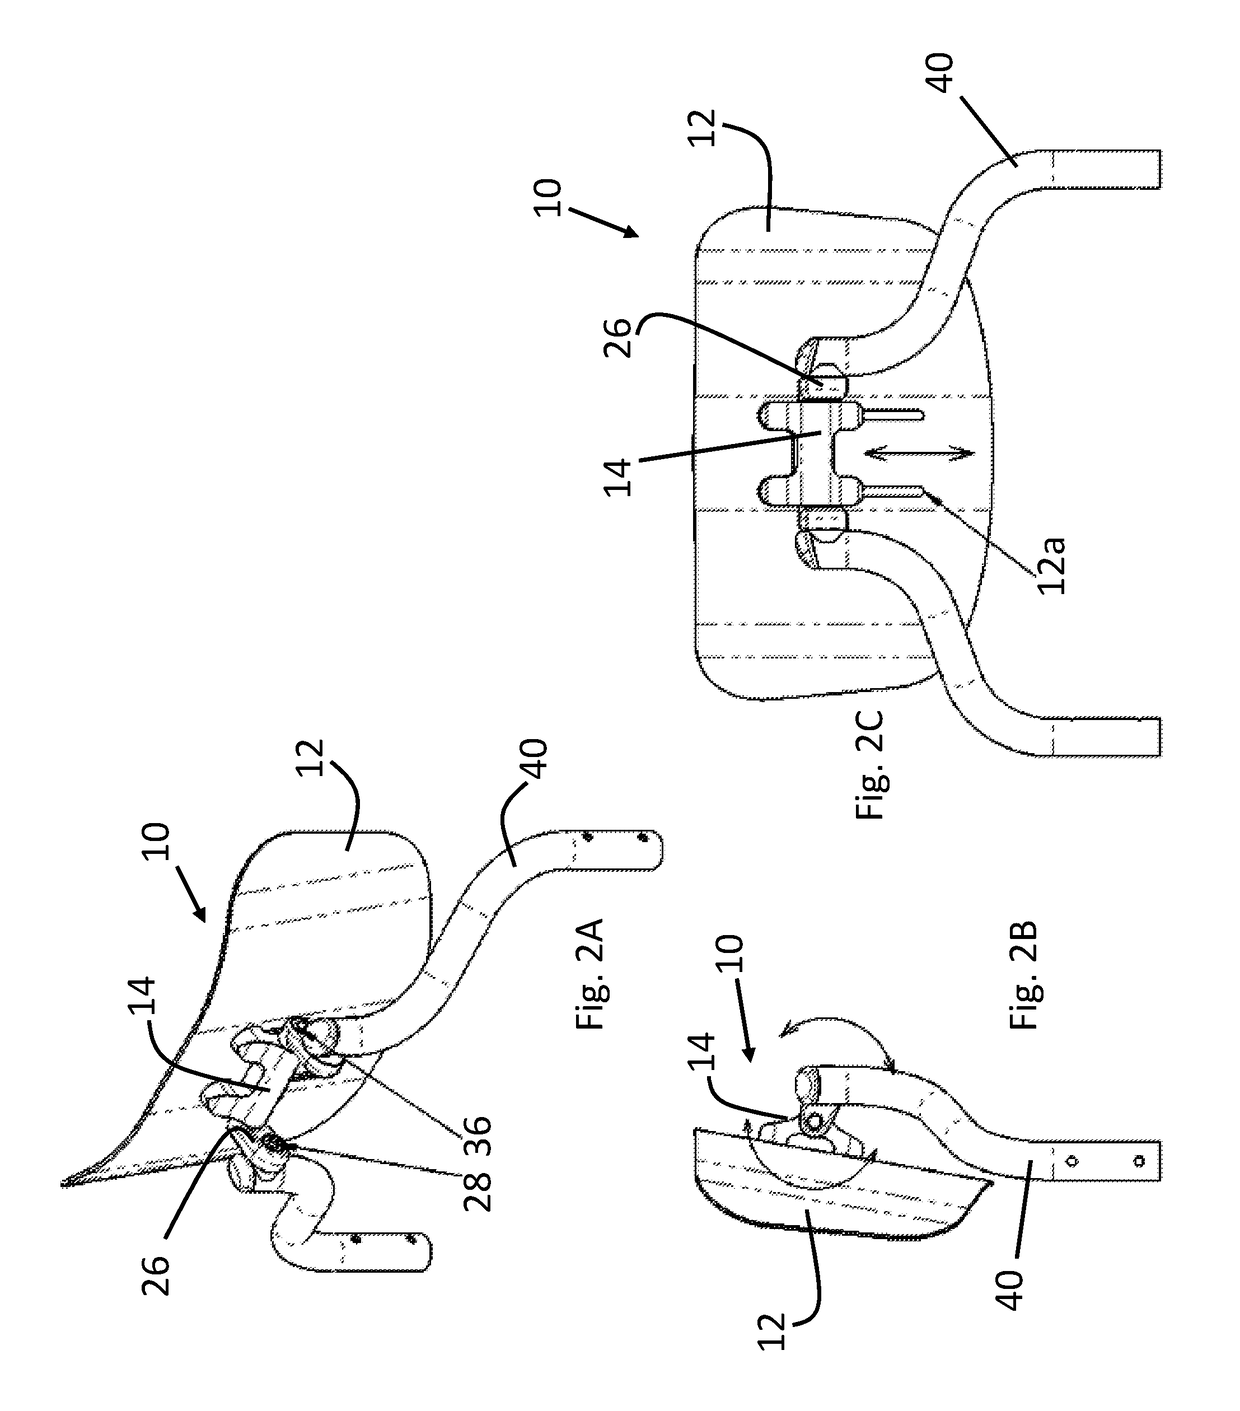 Wheelchair backrest mounting system